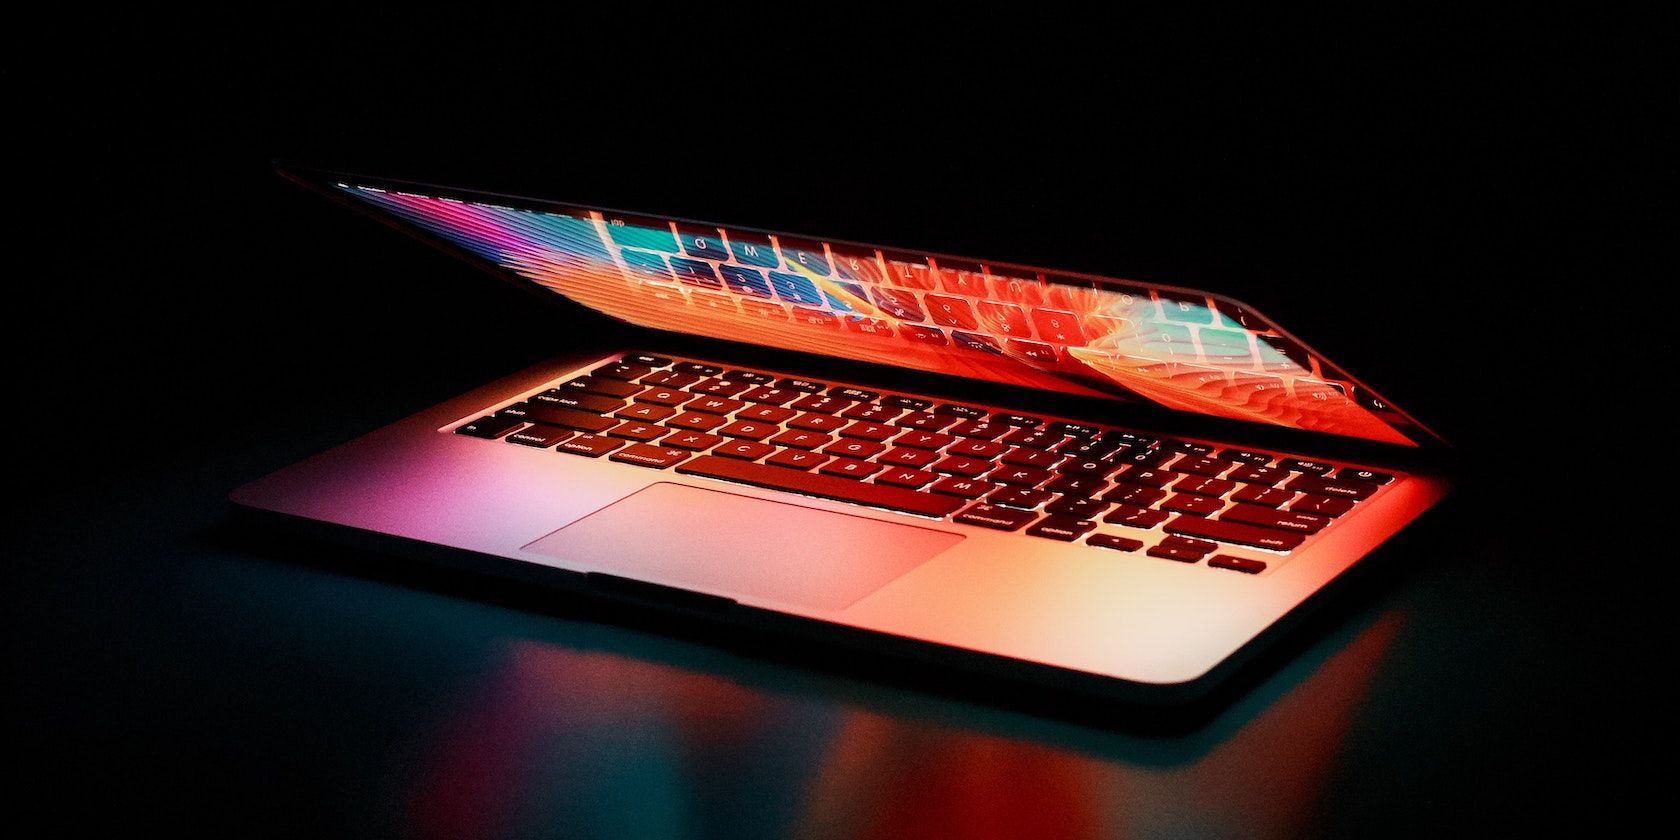 A partially open MacBook sits on a table in the dark